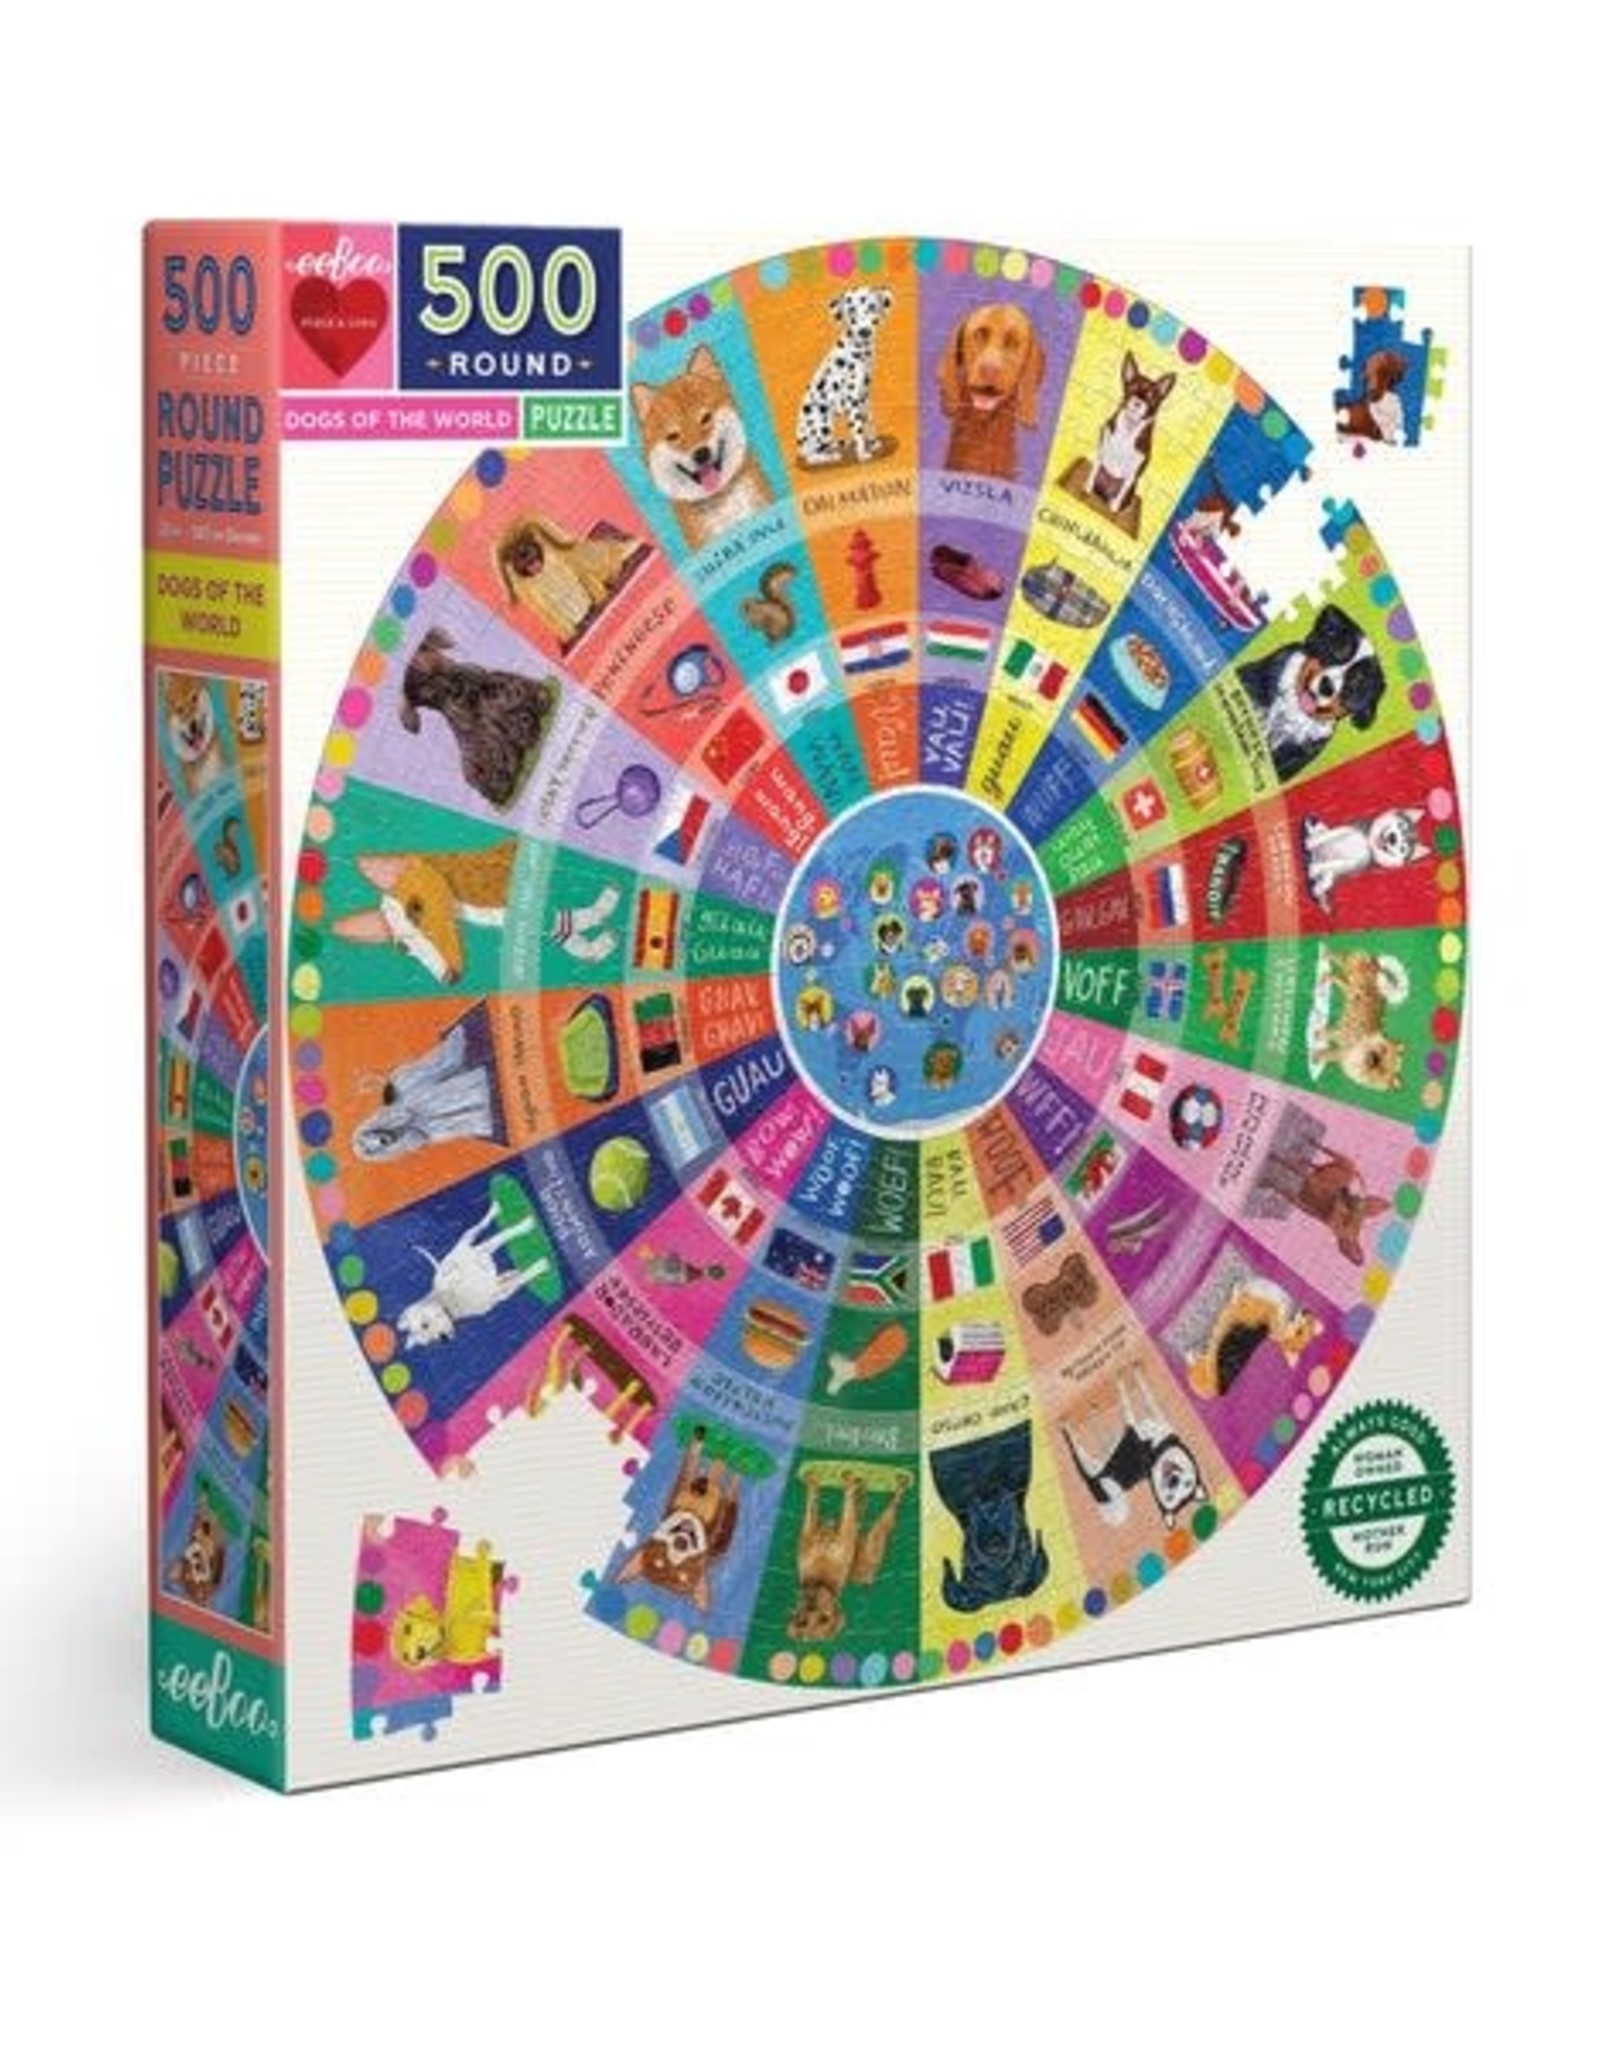 eeBoo DOGS OF THE WORLD 500 ROUND PUZZLE